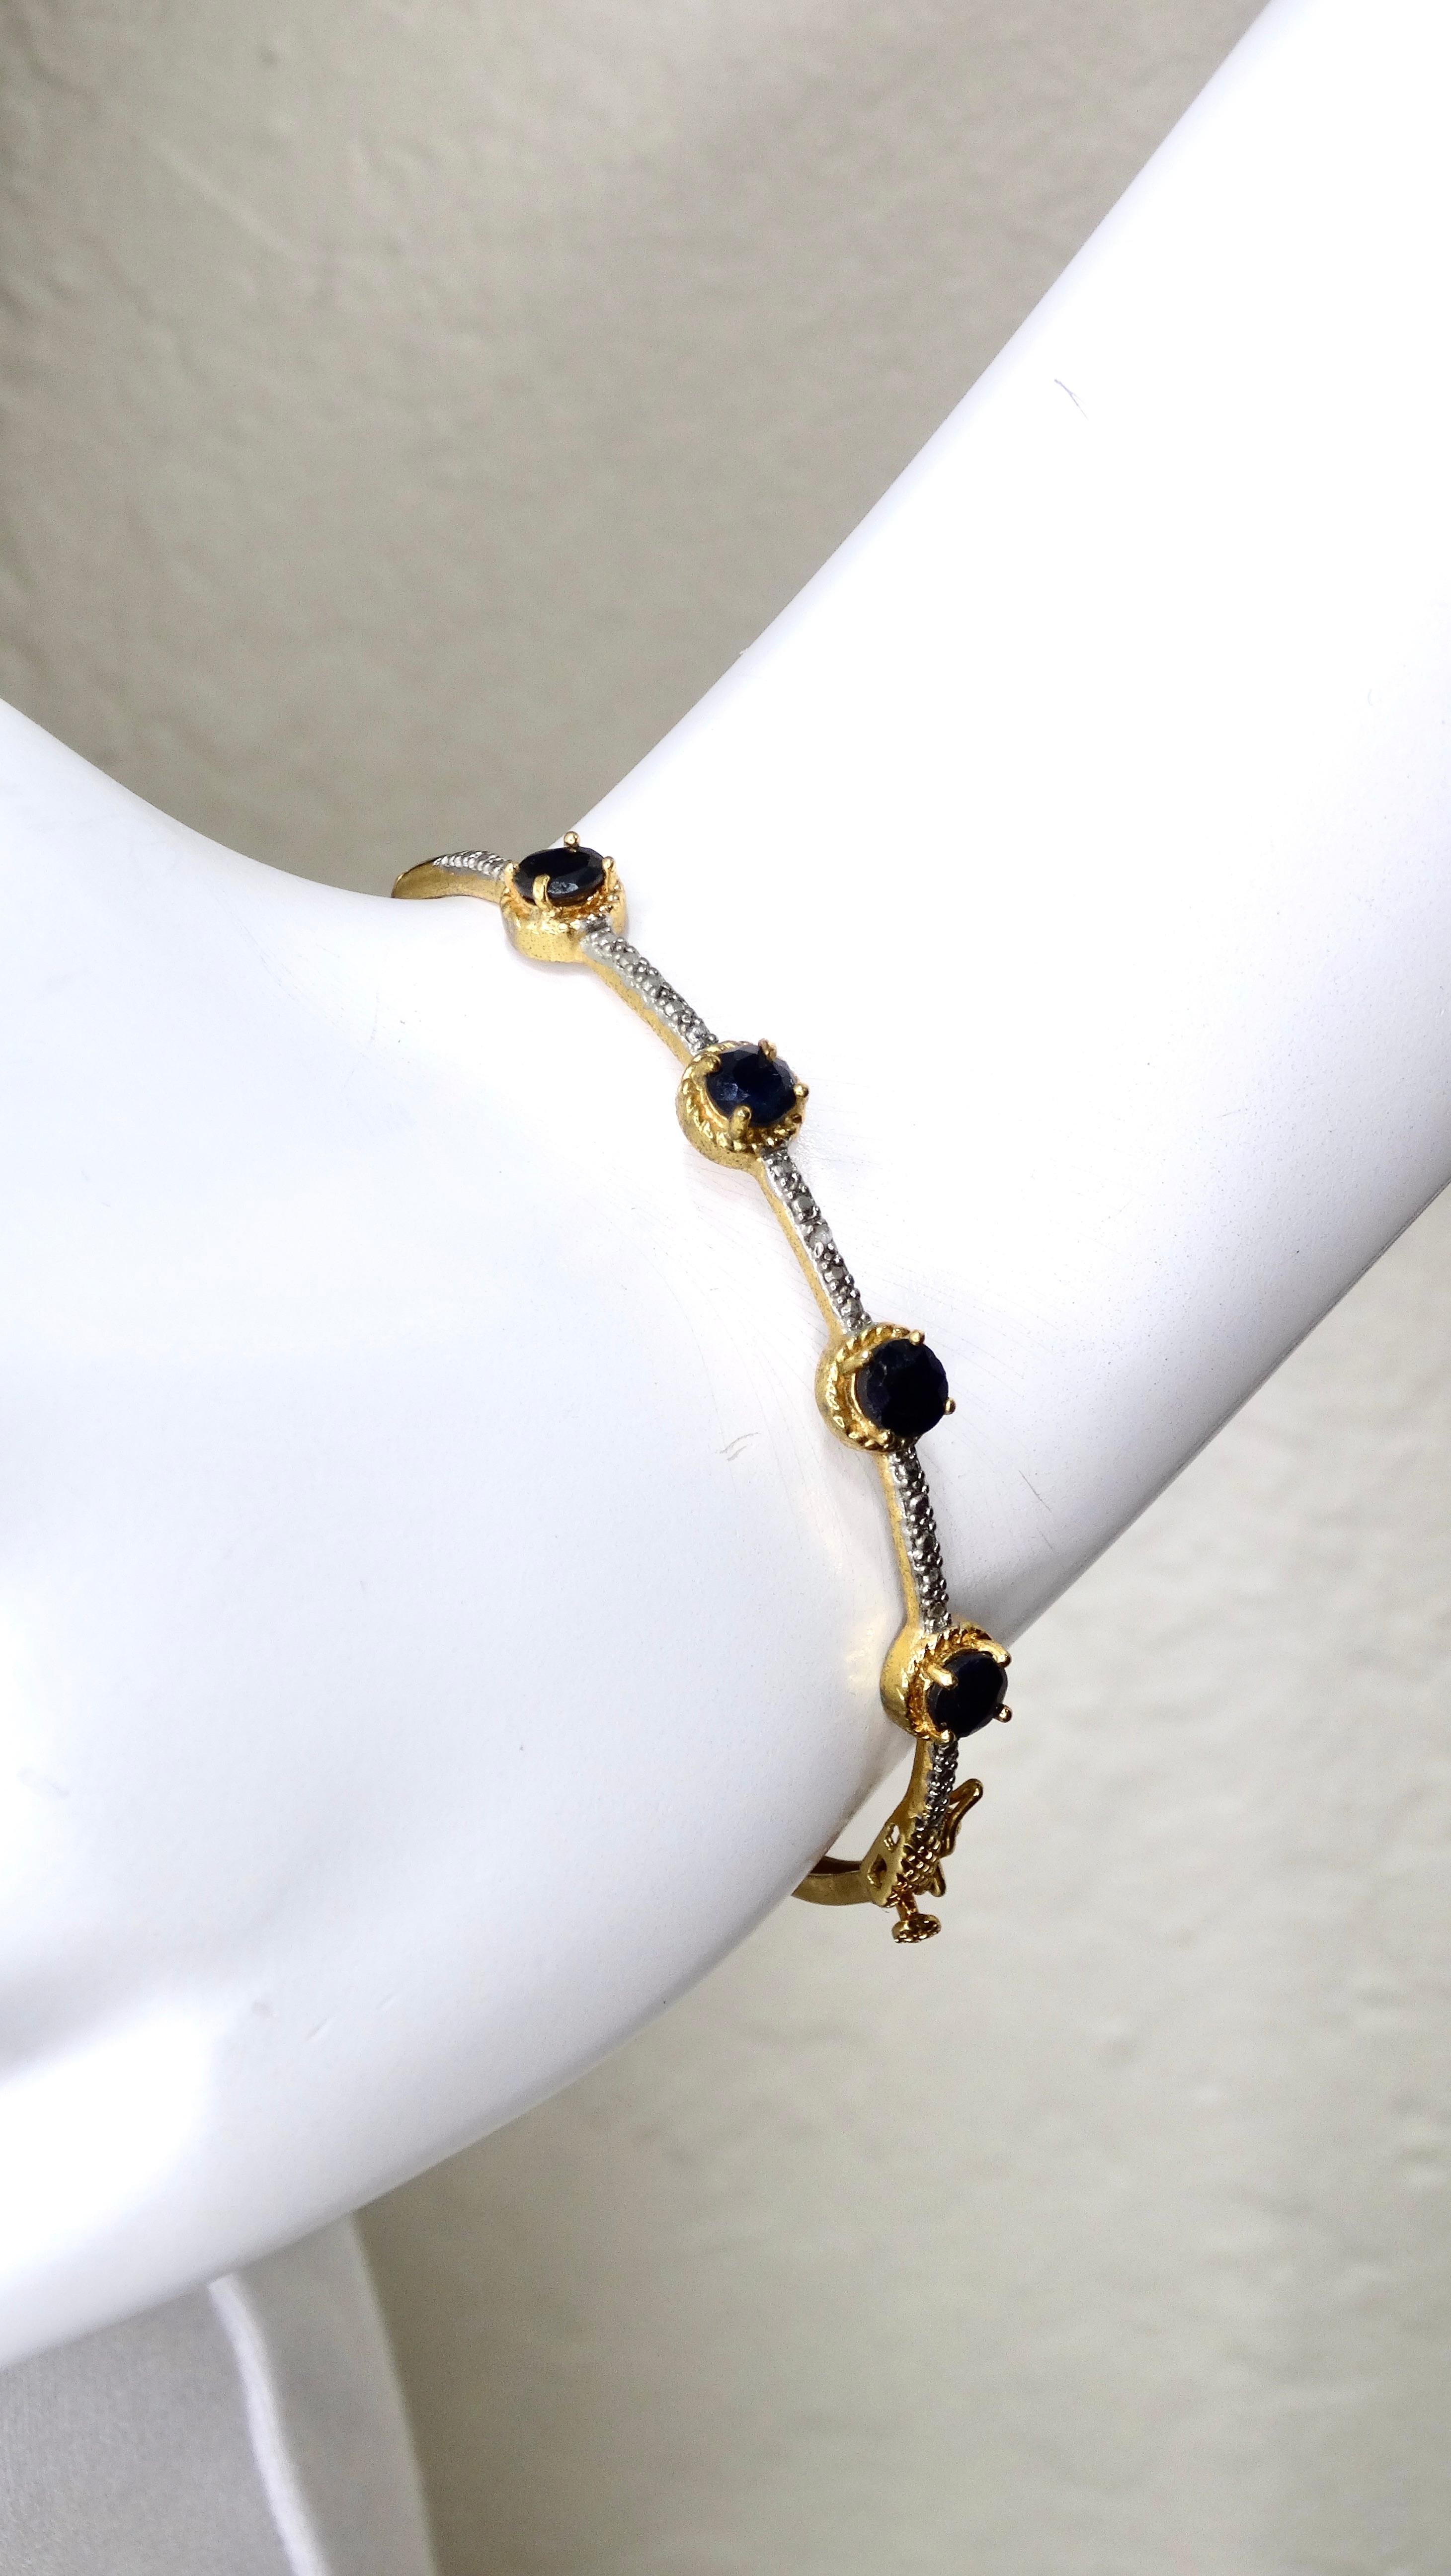 Do not miss out on the chance to get this ultra-rare piece of fine jewelry that you cannot get anywhere else! This vintage 1920's sapphire studded bracelet has to be in your jewelry collection! It is universal and can pair with most of your closet.